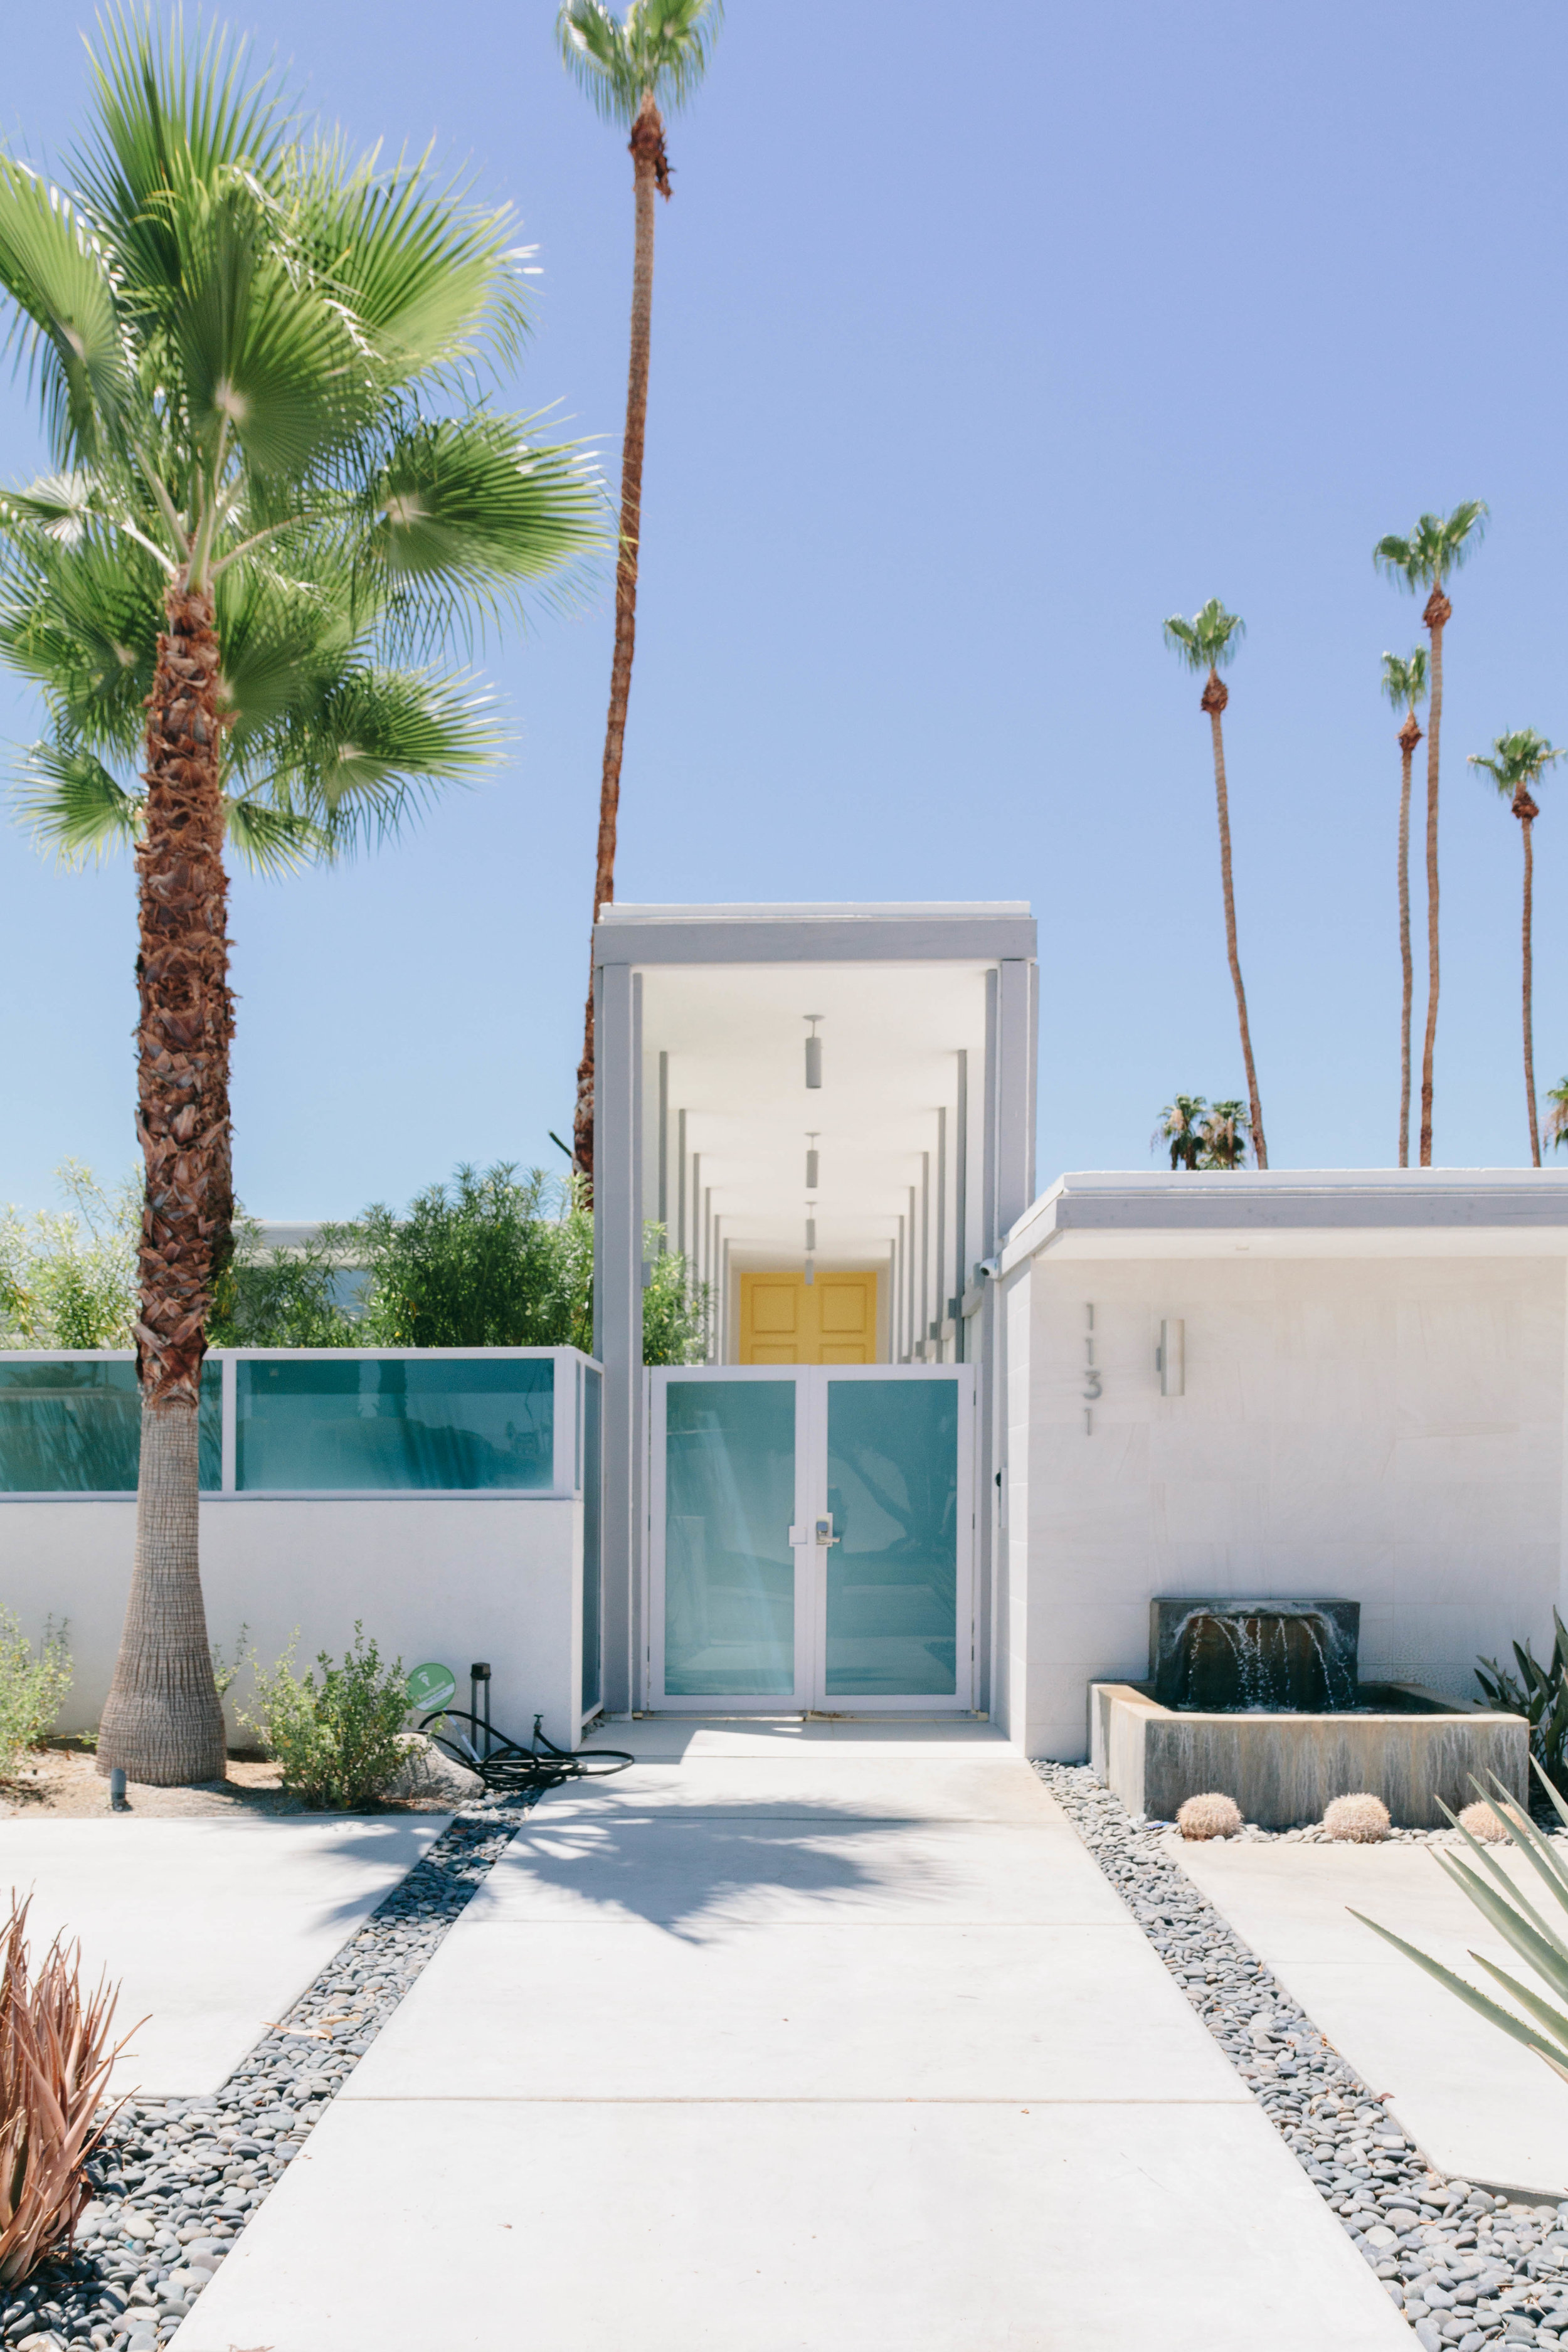 Chasing my mid-century modern dreams in Palm Springs — Shannon Hammond ...